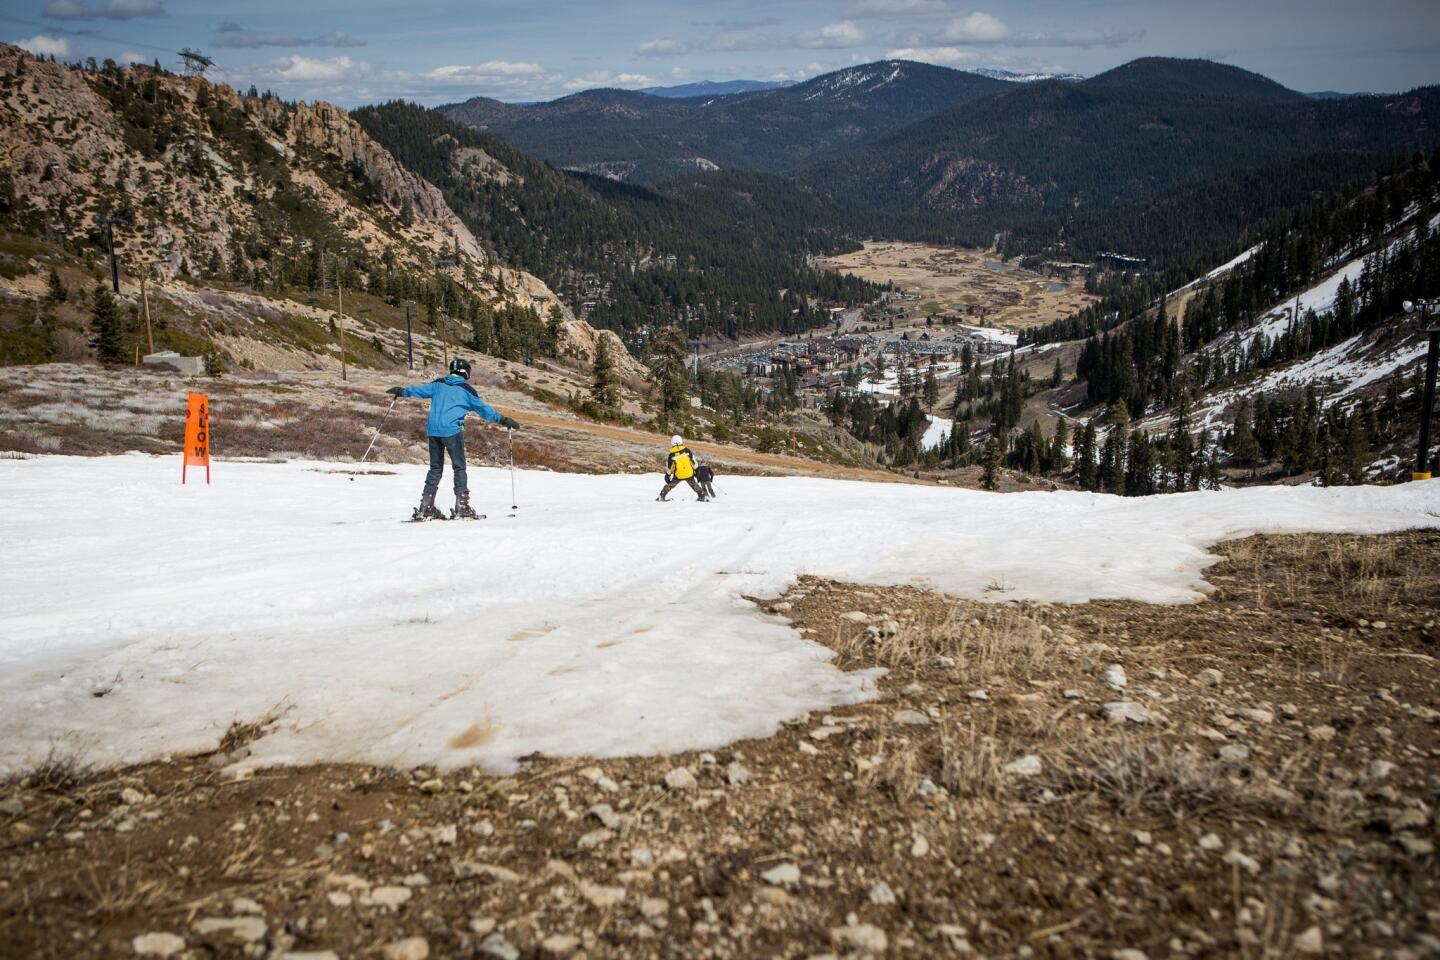 Skiers make their way around patches of dirt at Squaw Valley Ski Resort.